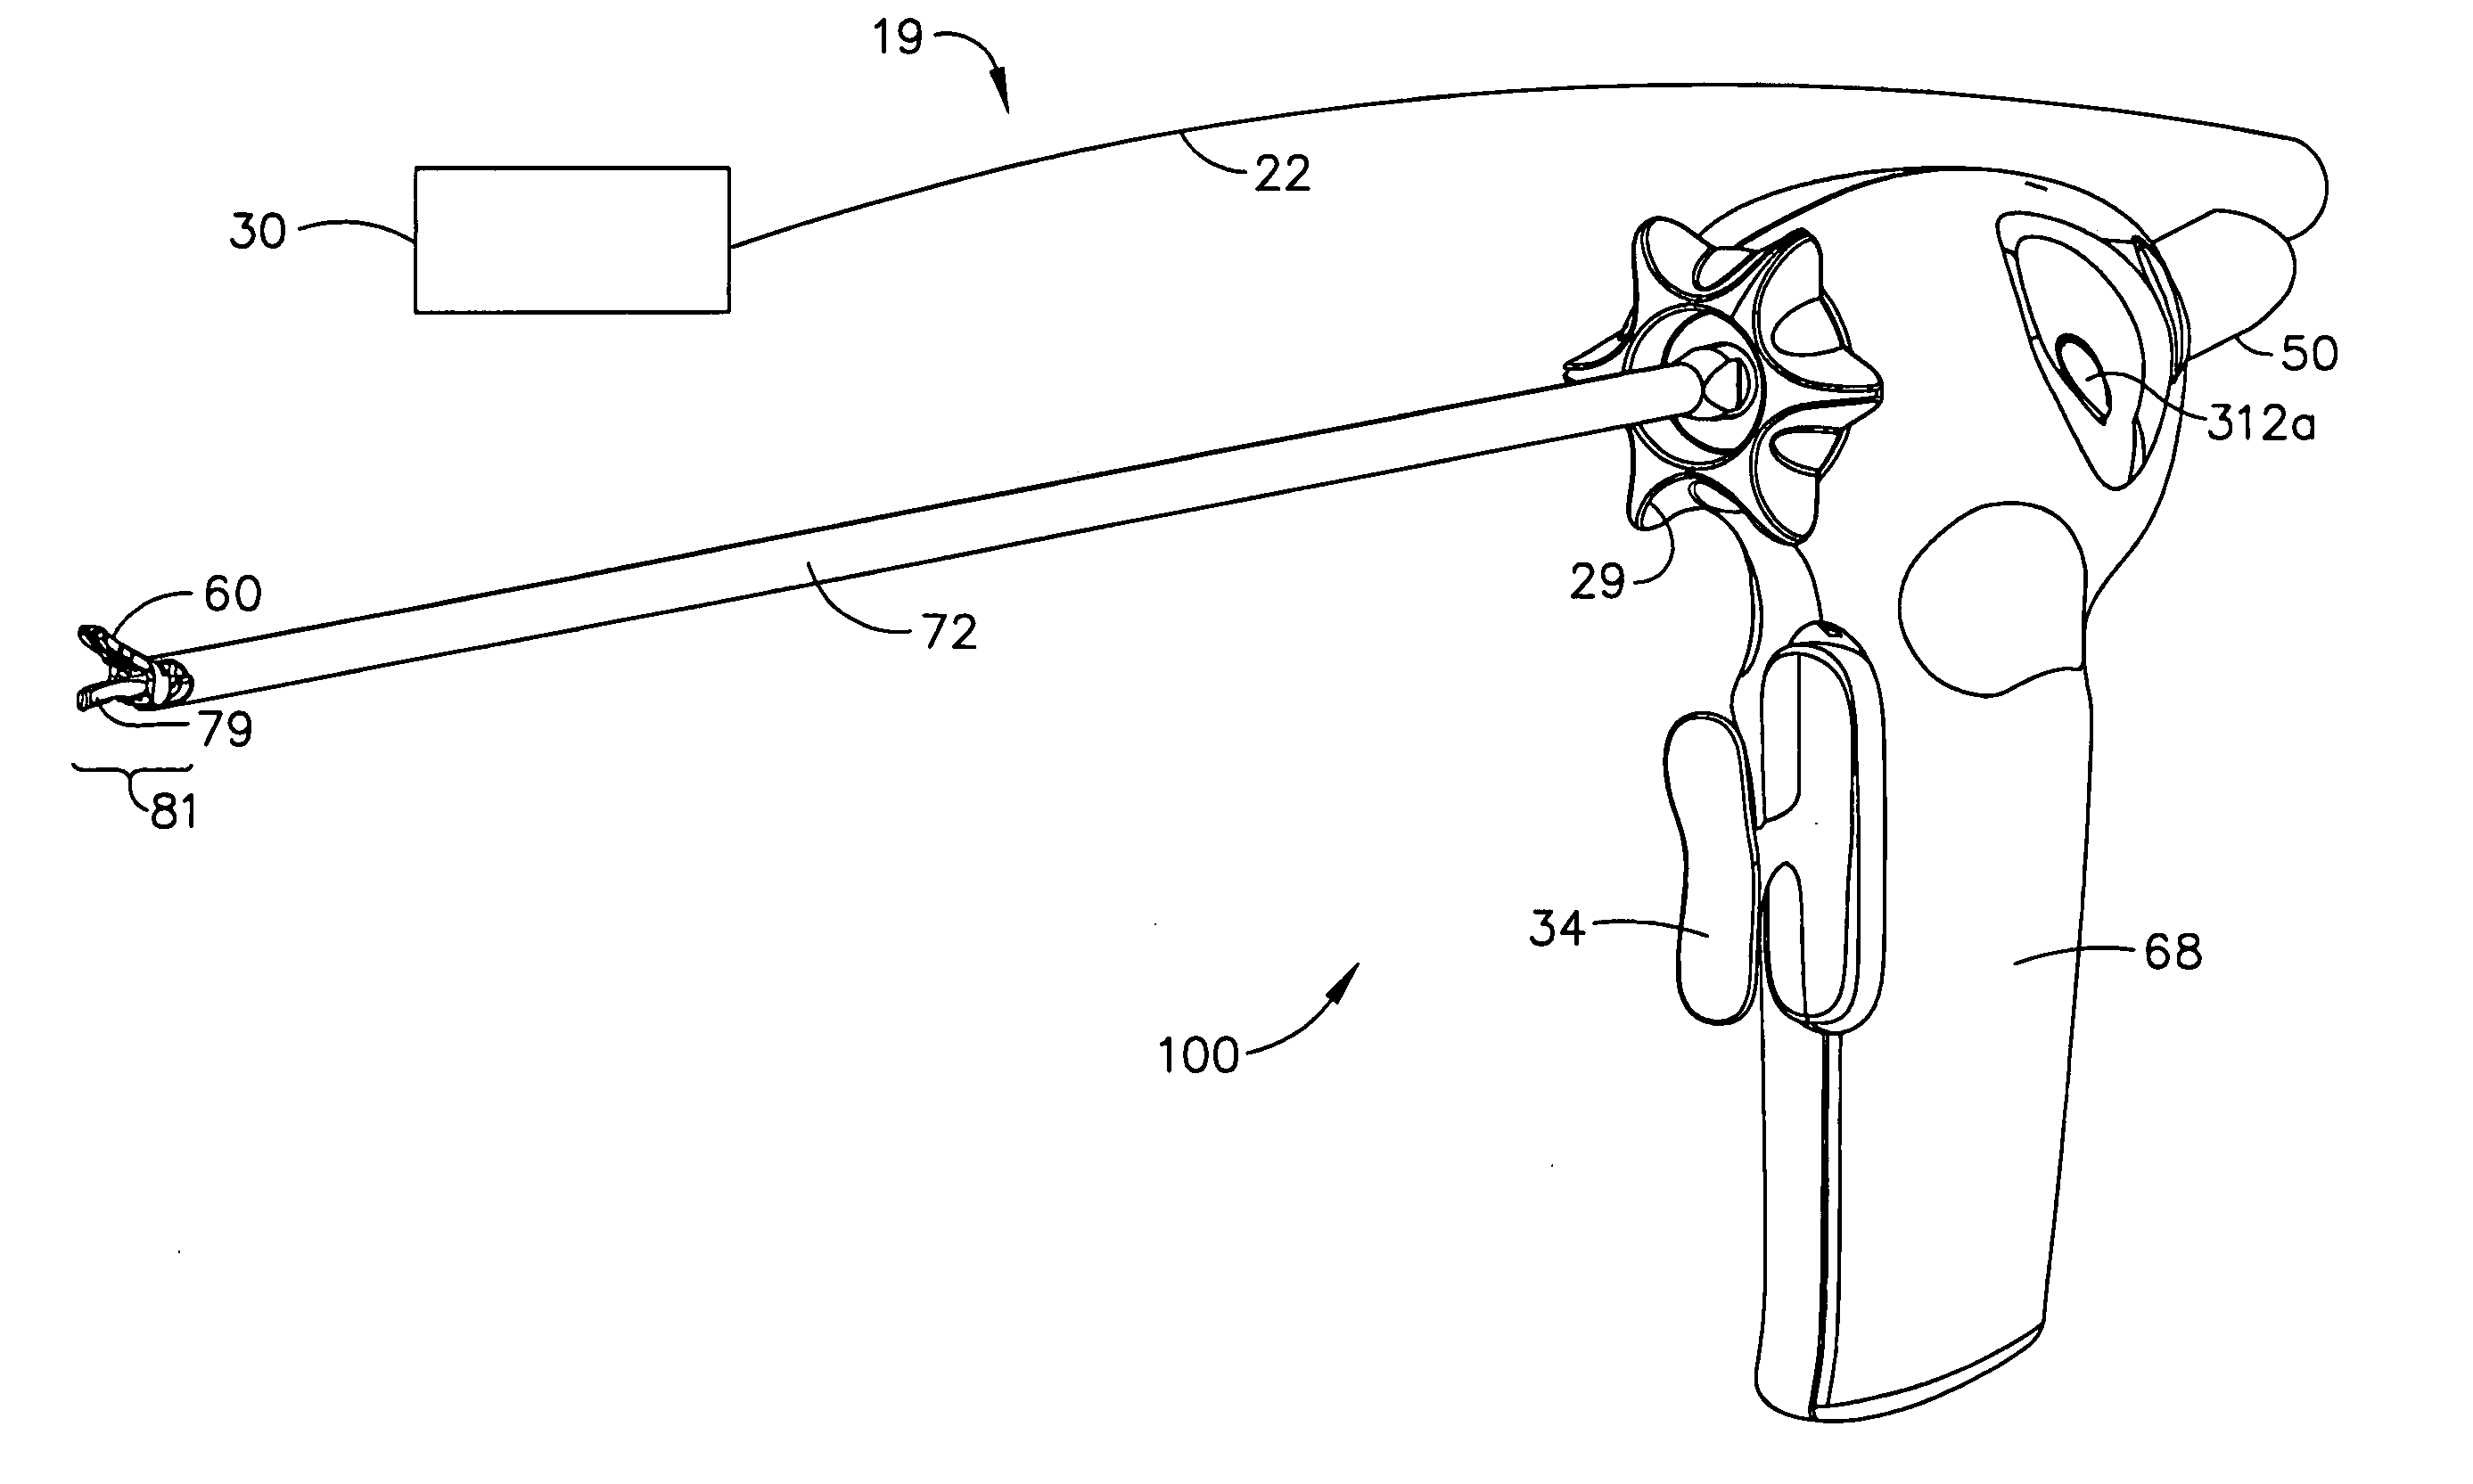 Tissue pad for use with an ultrasonic surgical instrument